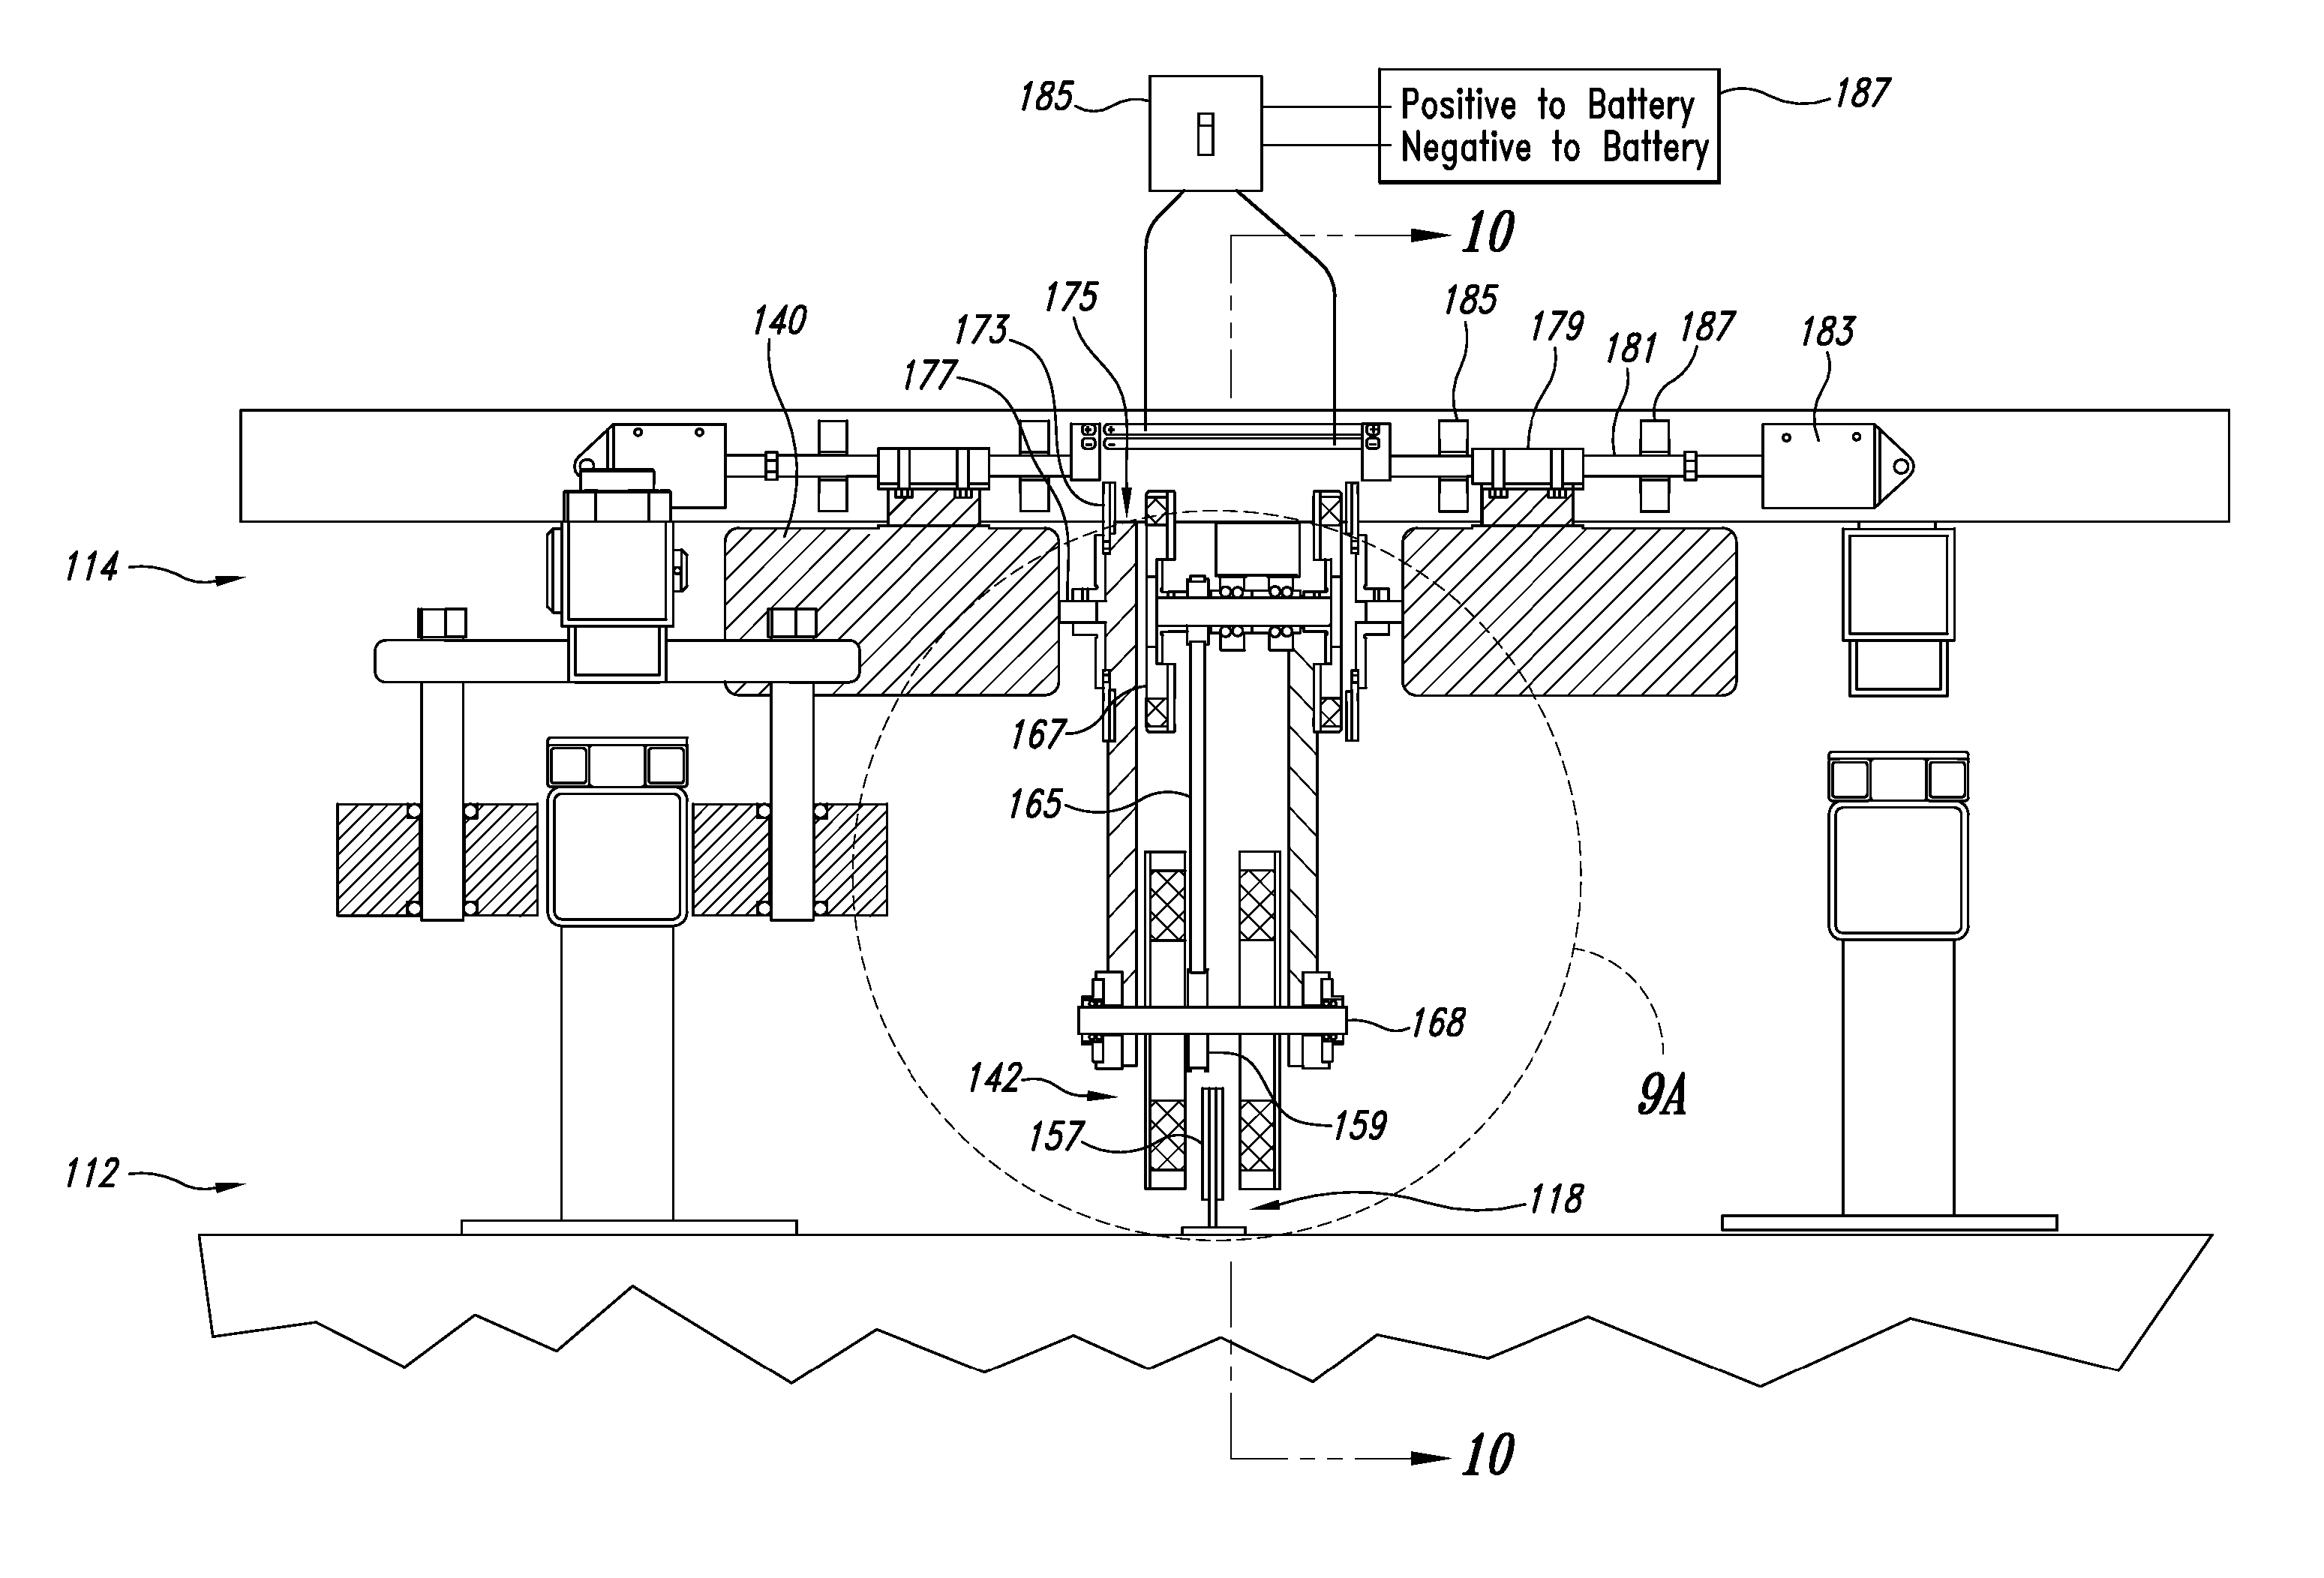 Apparatus, systems and methods for levitating and moving objects